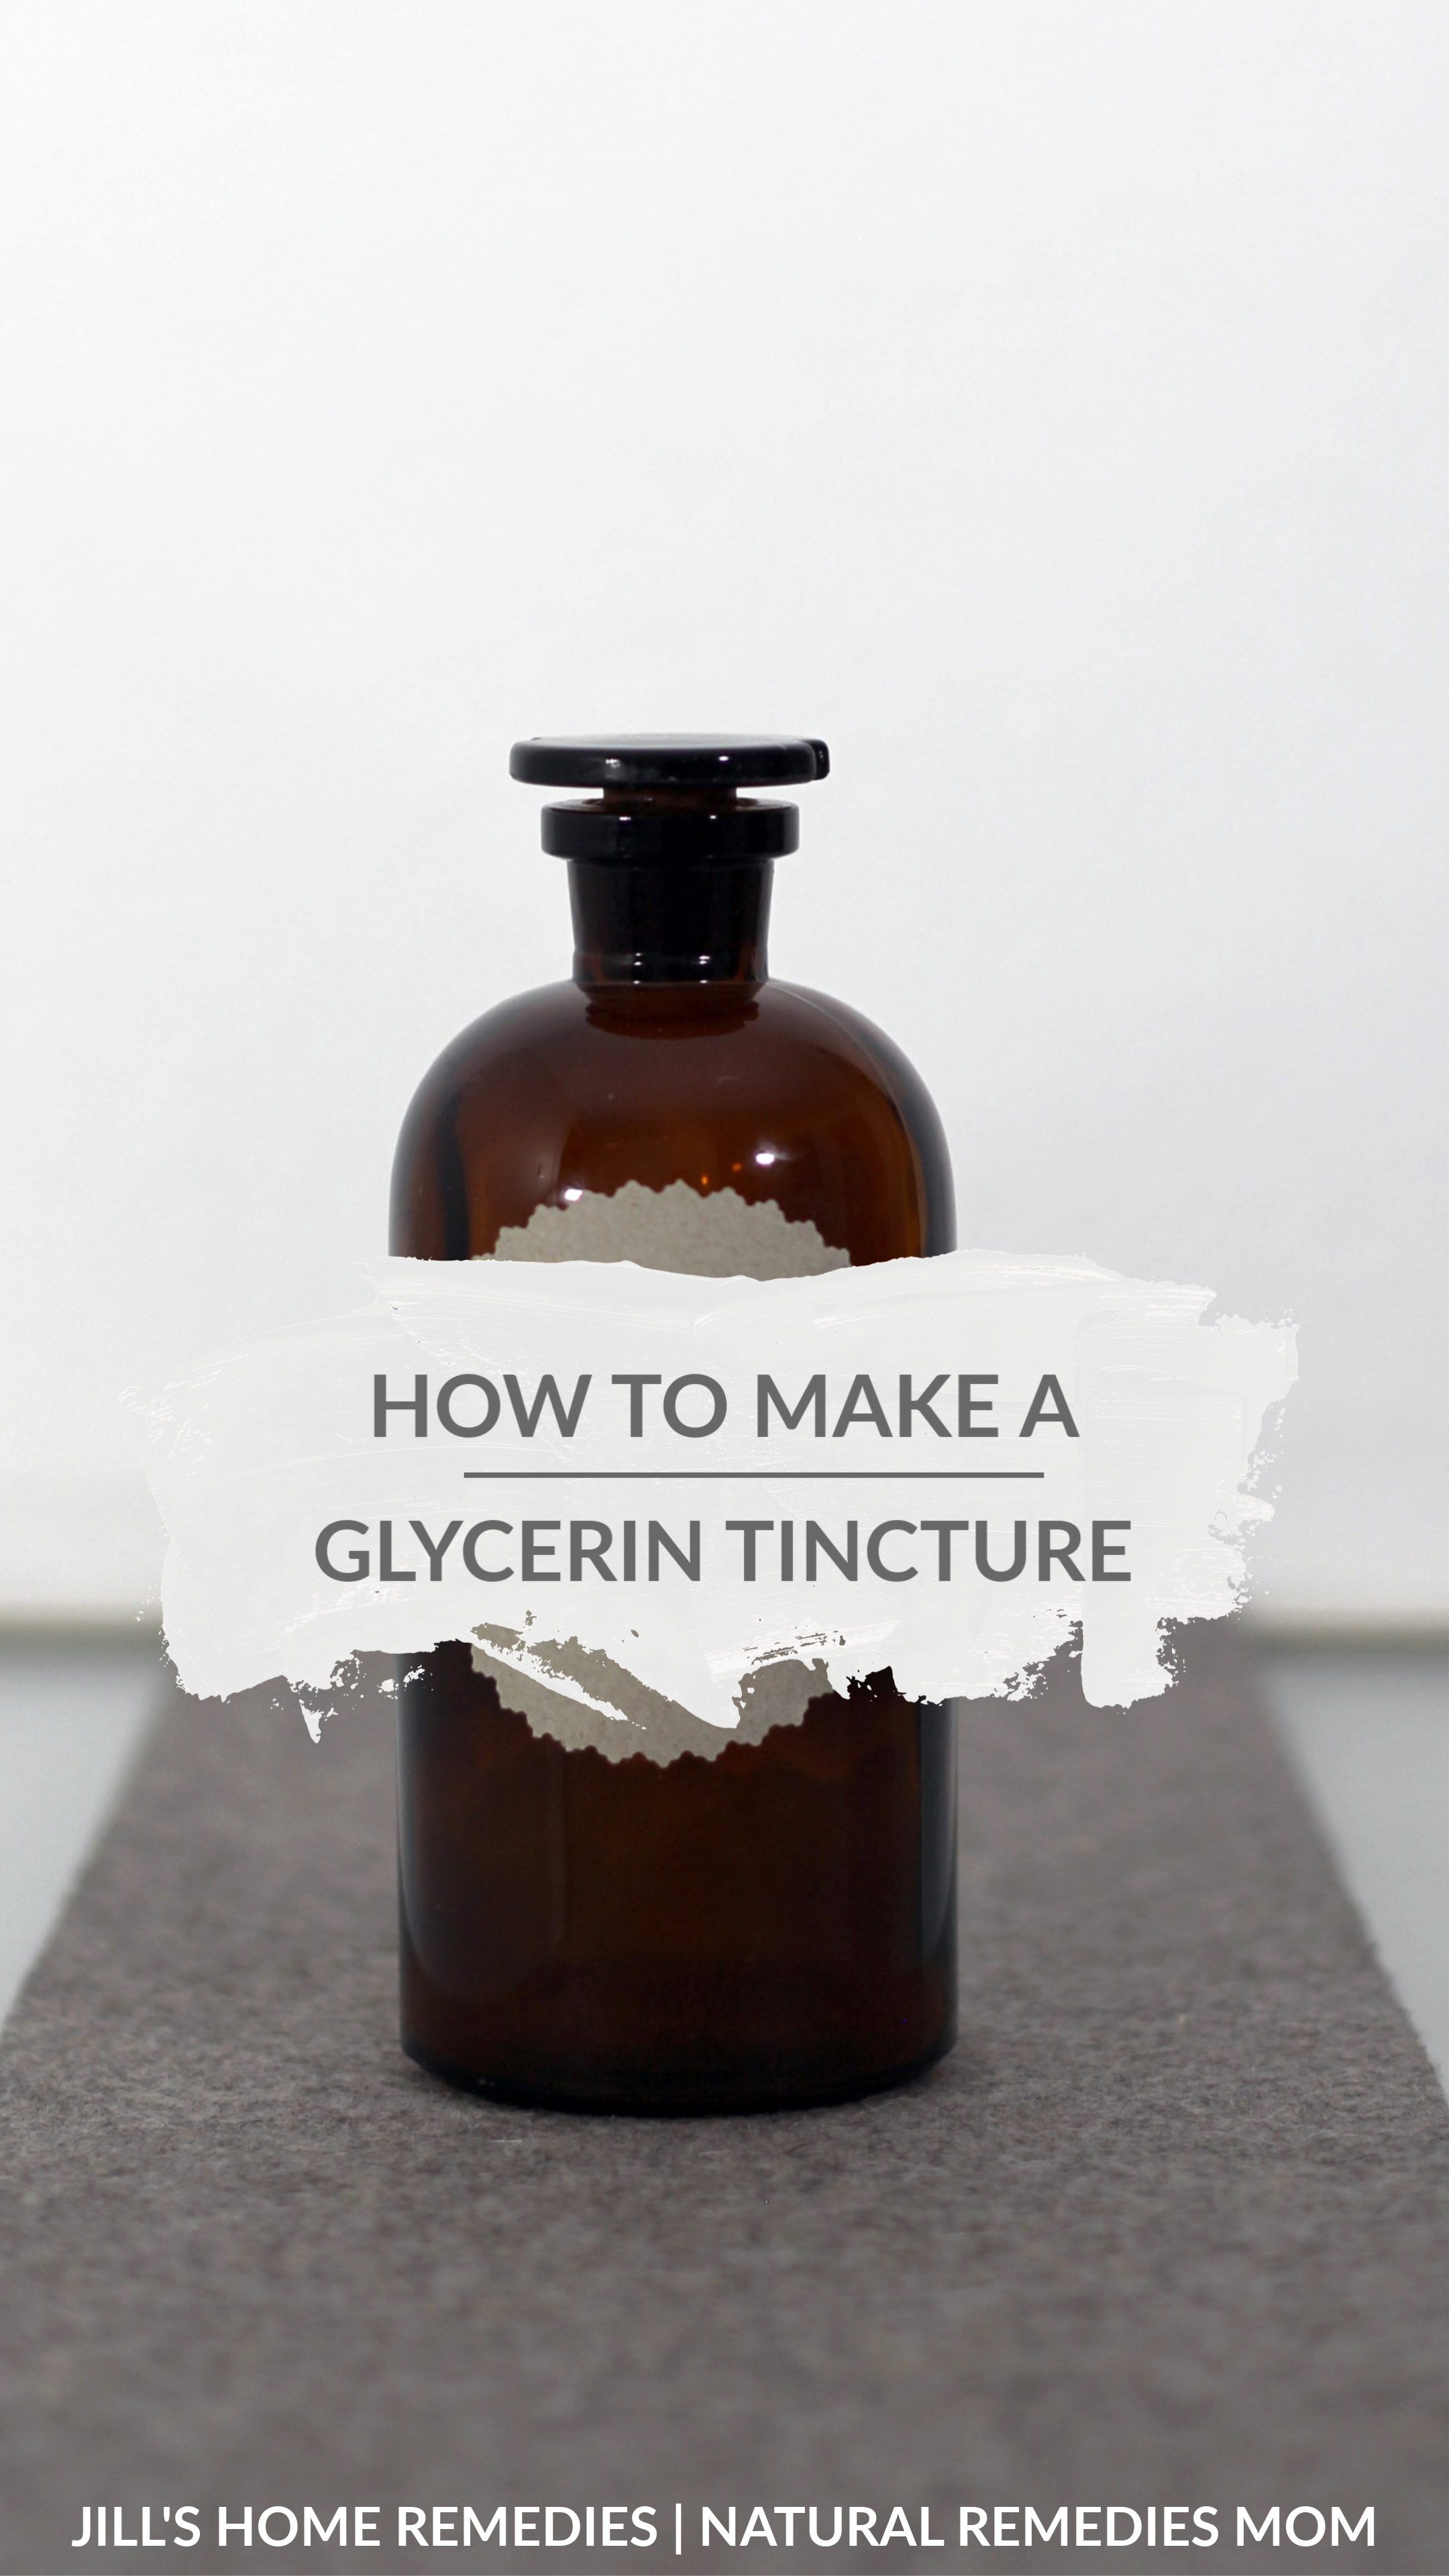 How To Make an Herbal Glycerite